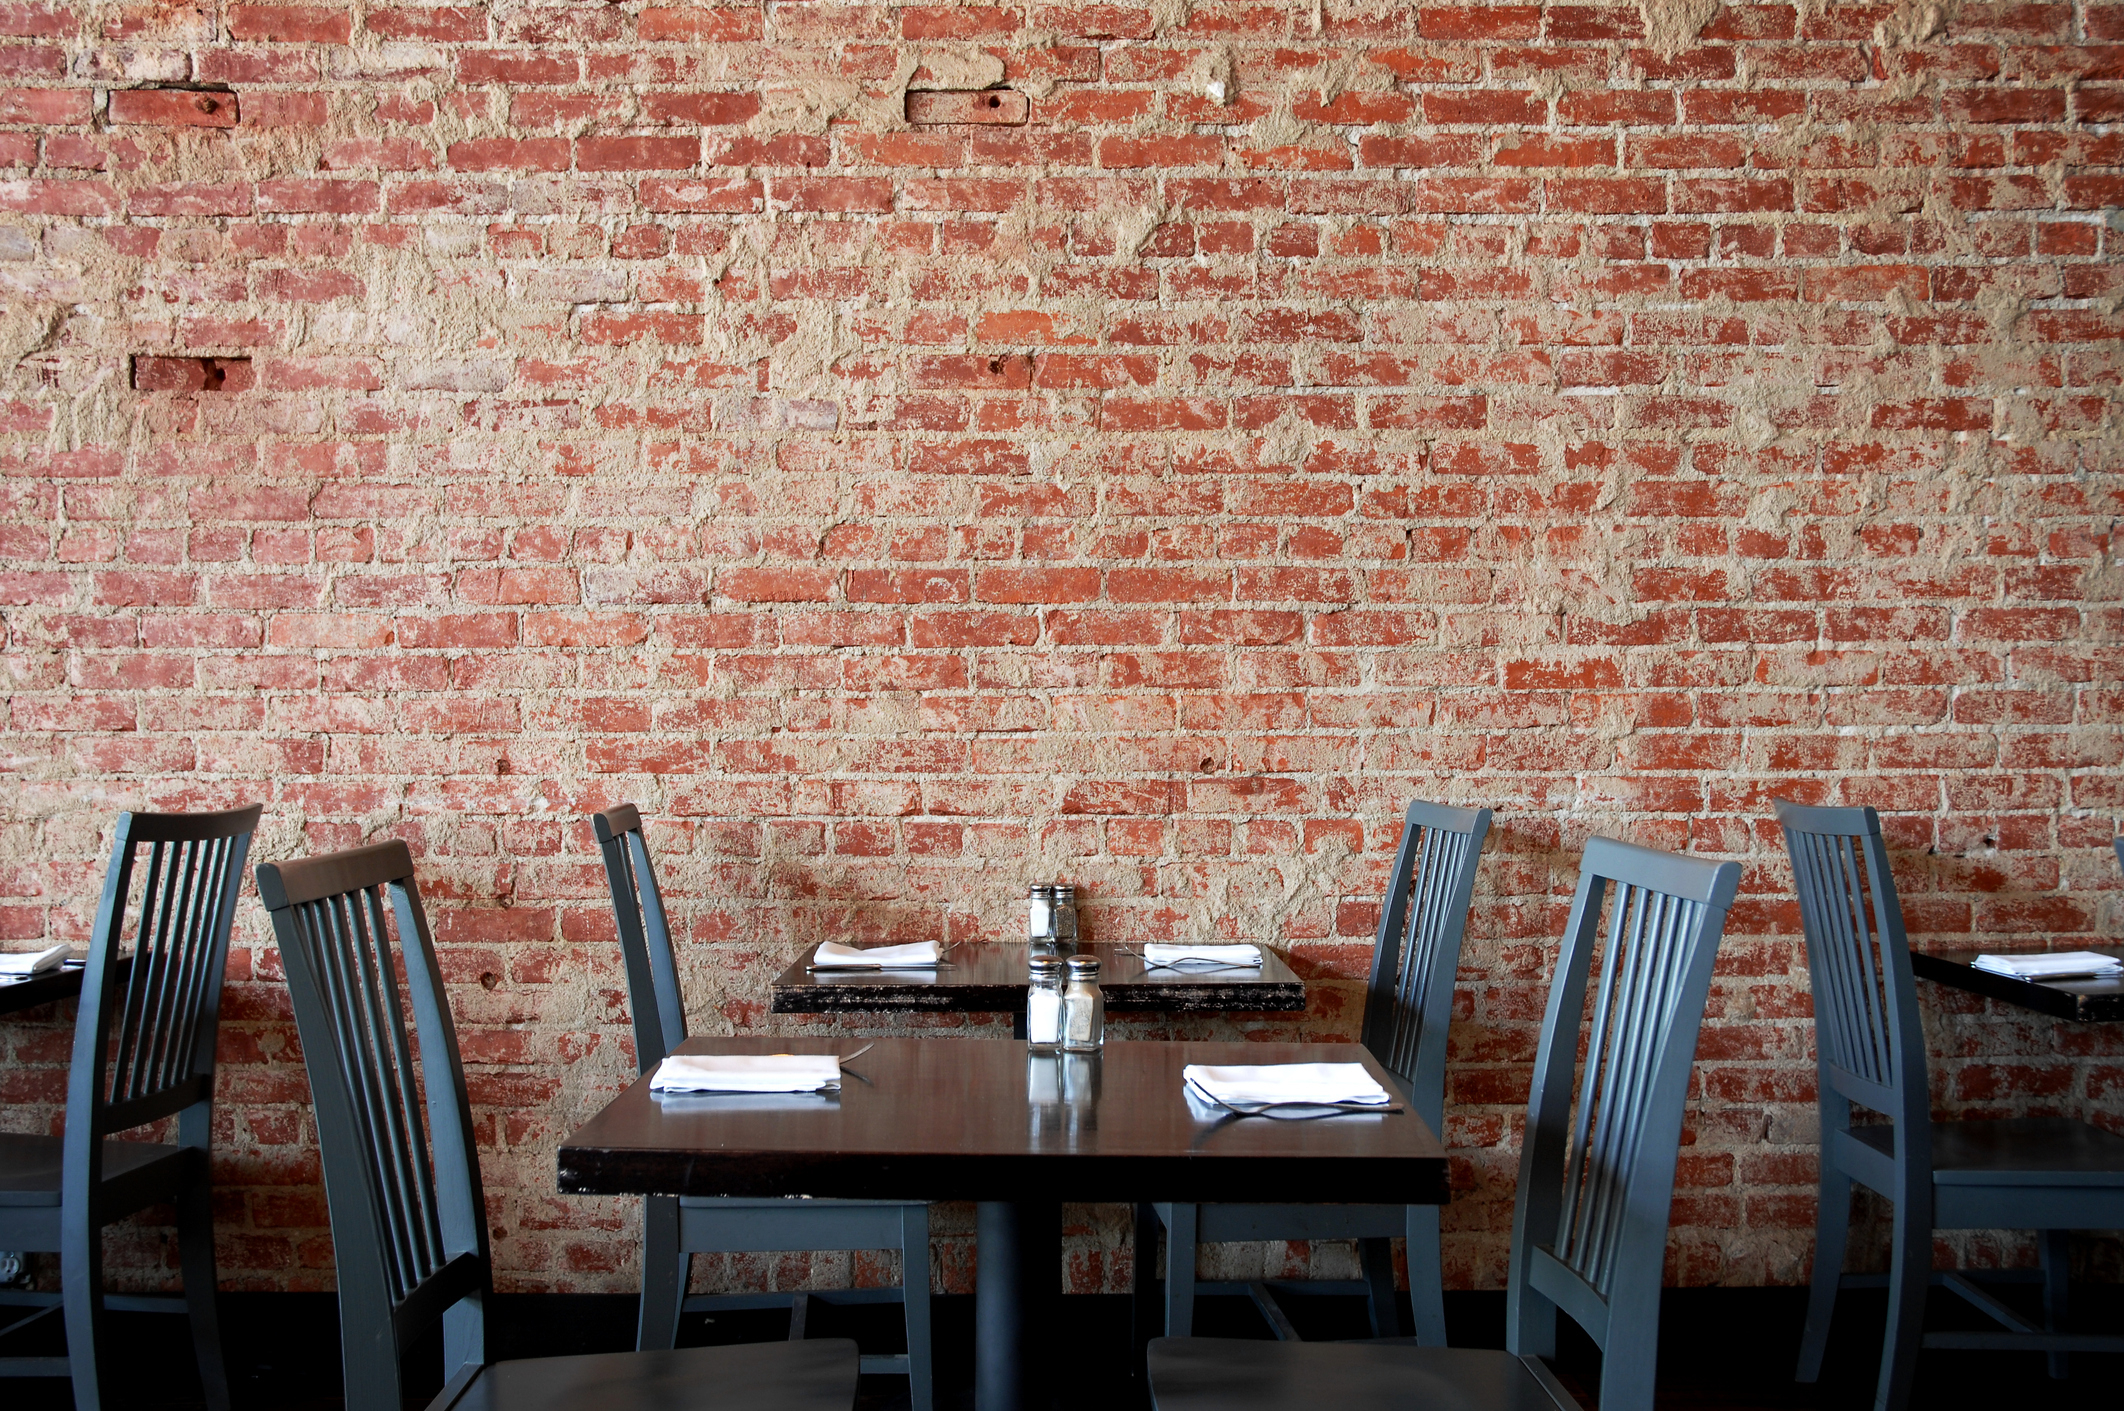 A dining area with empty chairs around tables, set with white plates and napkins, against a brick wall